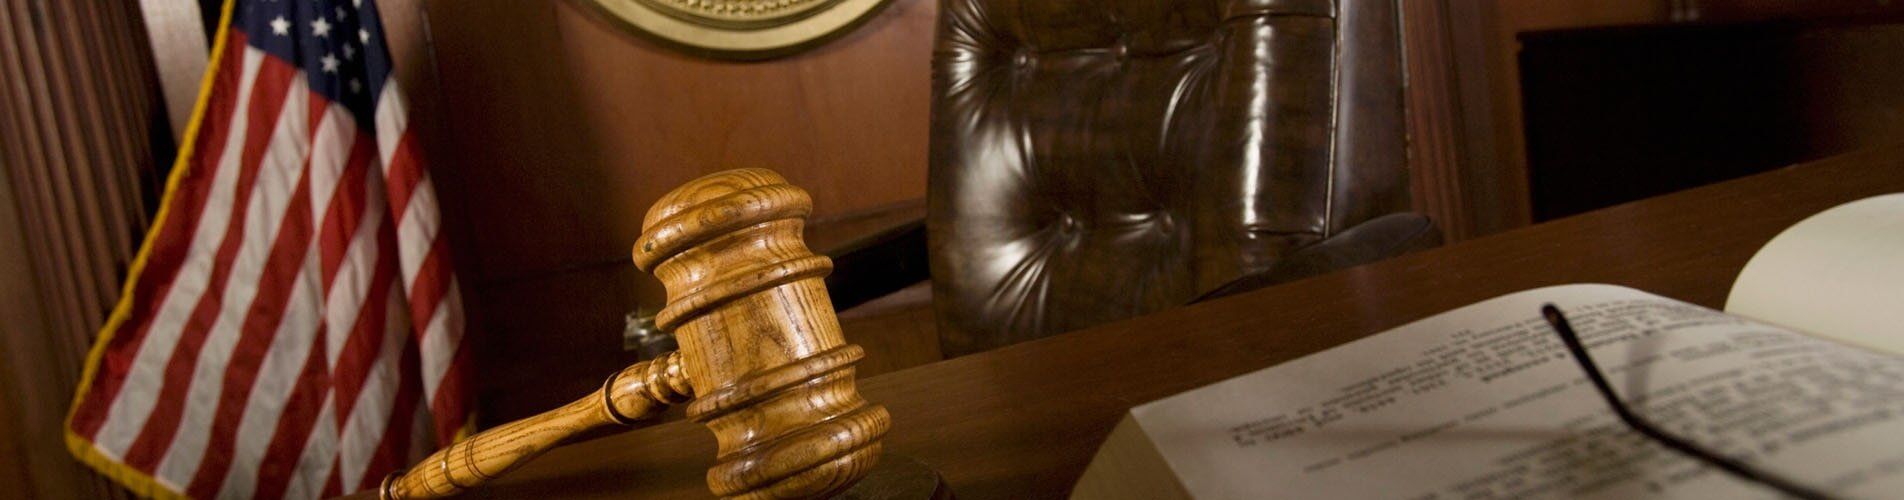 Gavel on a table — Criminal Defense Attorney in Fort Wayne, IN